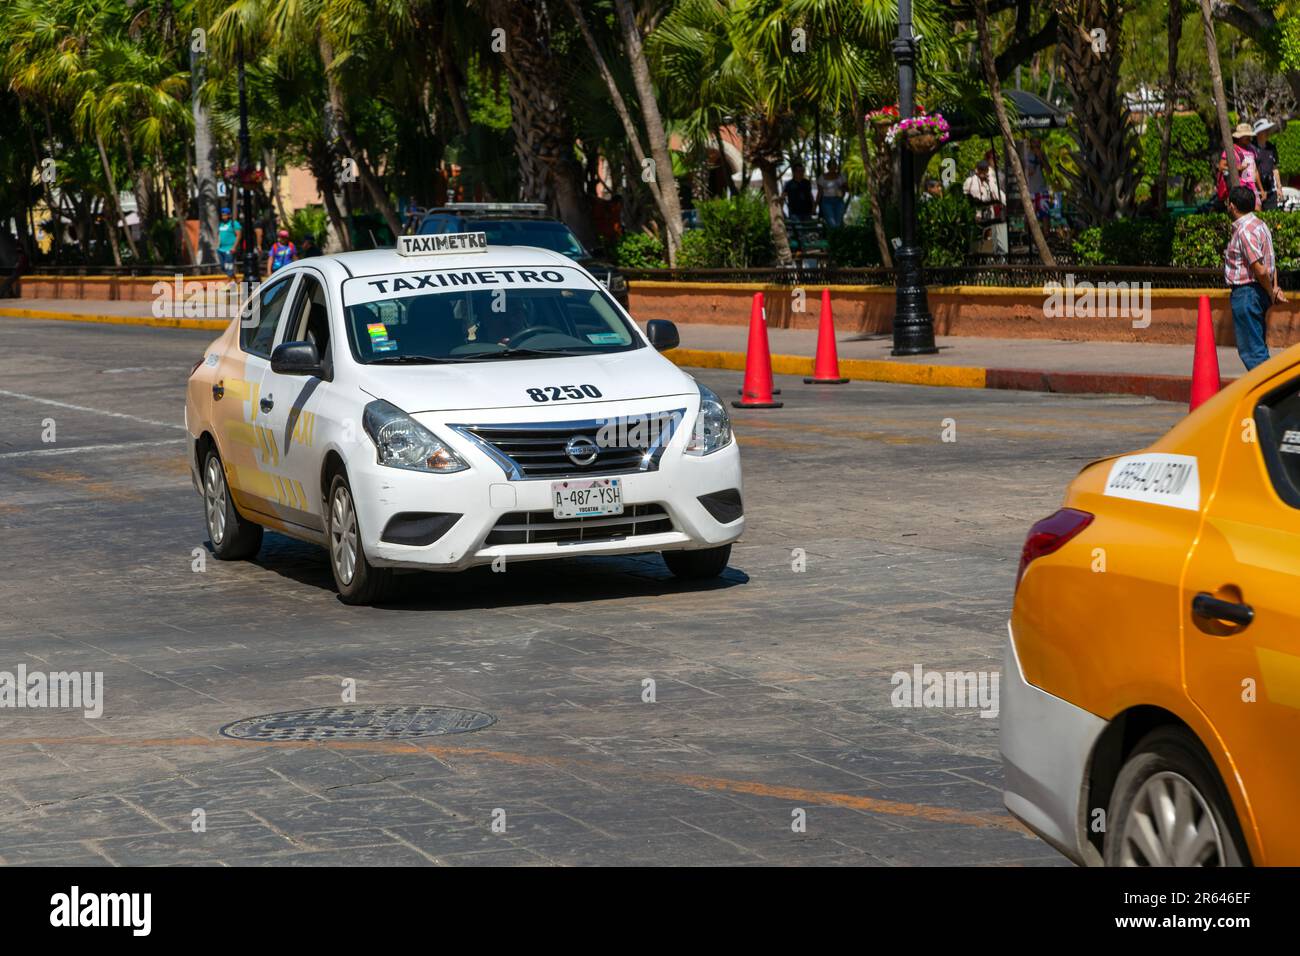 Taximeter metered taxi car in city centre, Merida, Yucatan State, Mexico Stock Photo